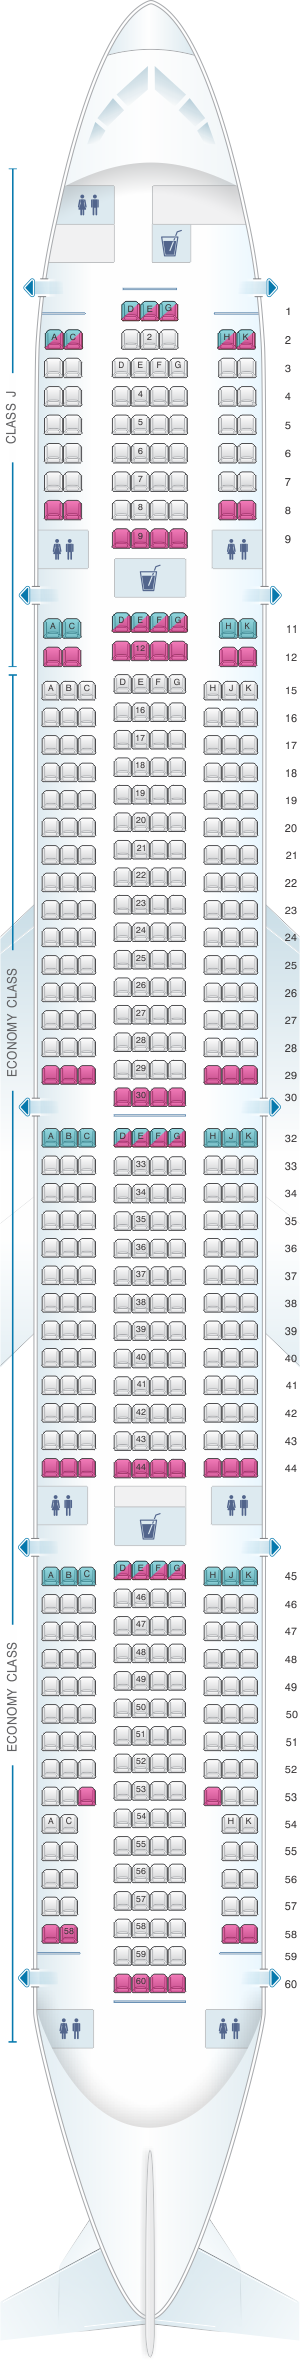 Seat map for Japan Airlines (JAL) Boeing B777 300 W24